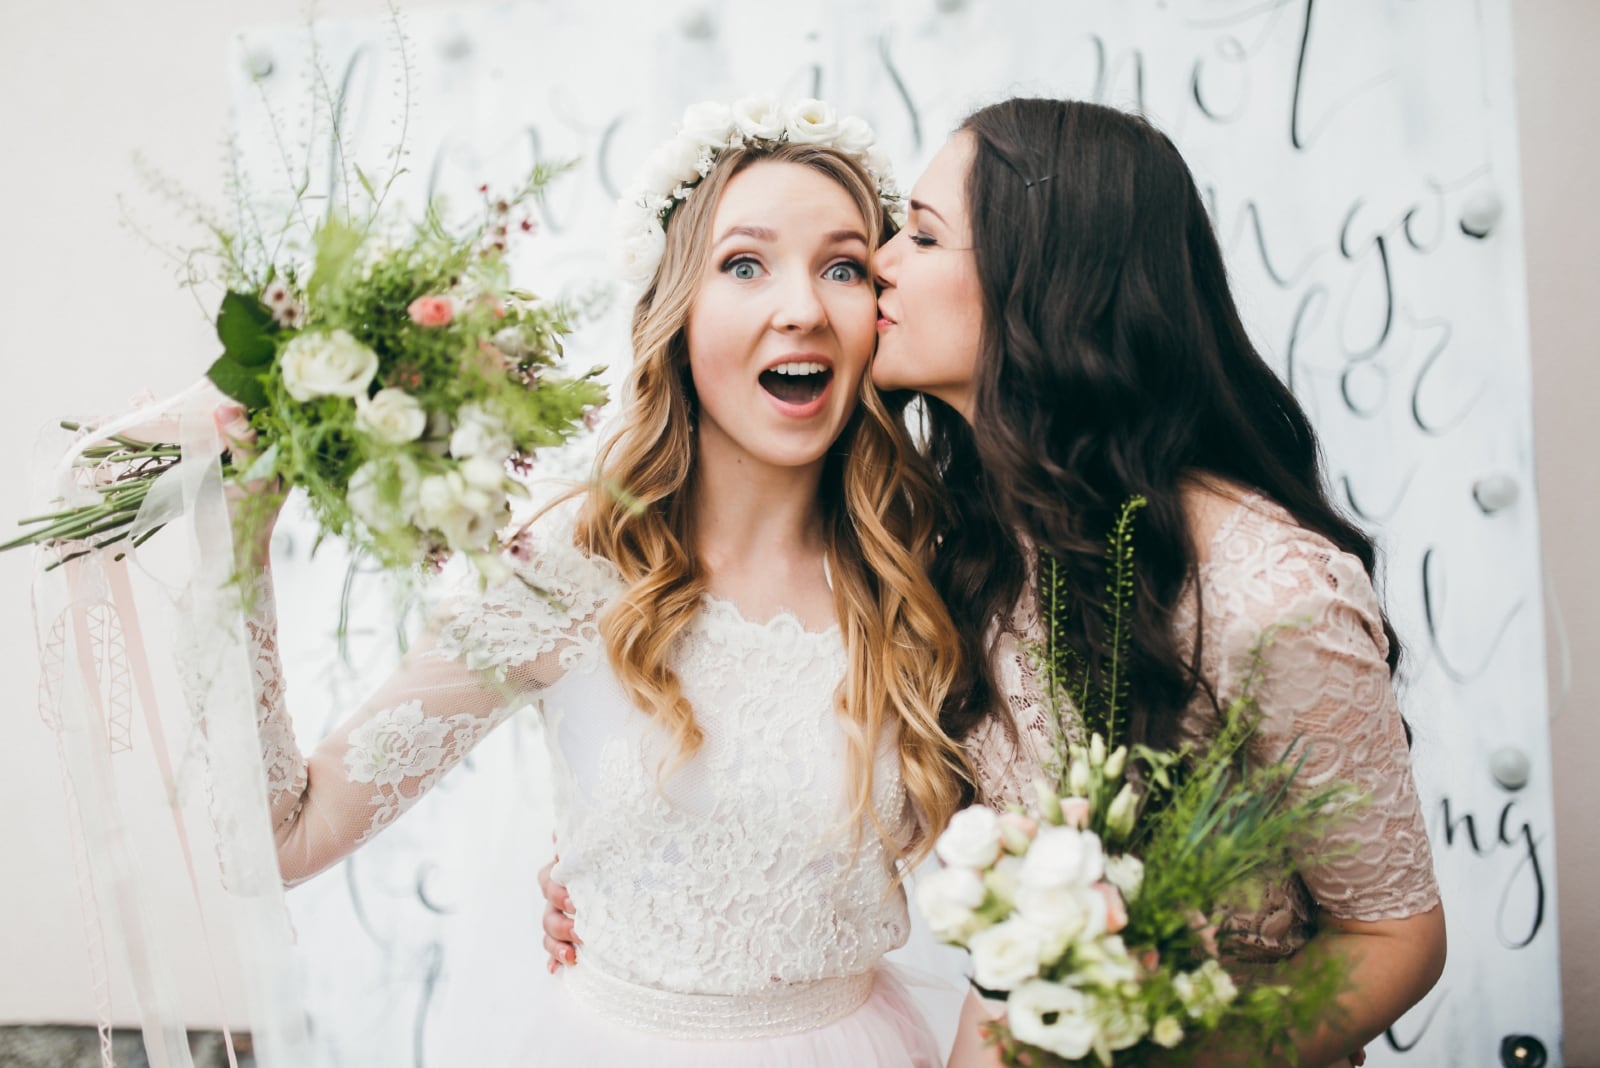 bridesmaid kissing bride on cheek while holding bouquet of flowers